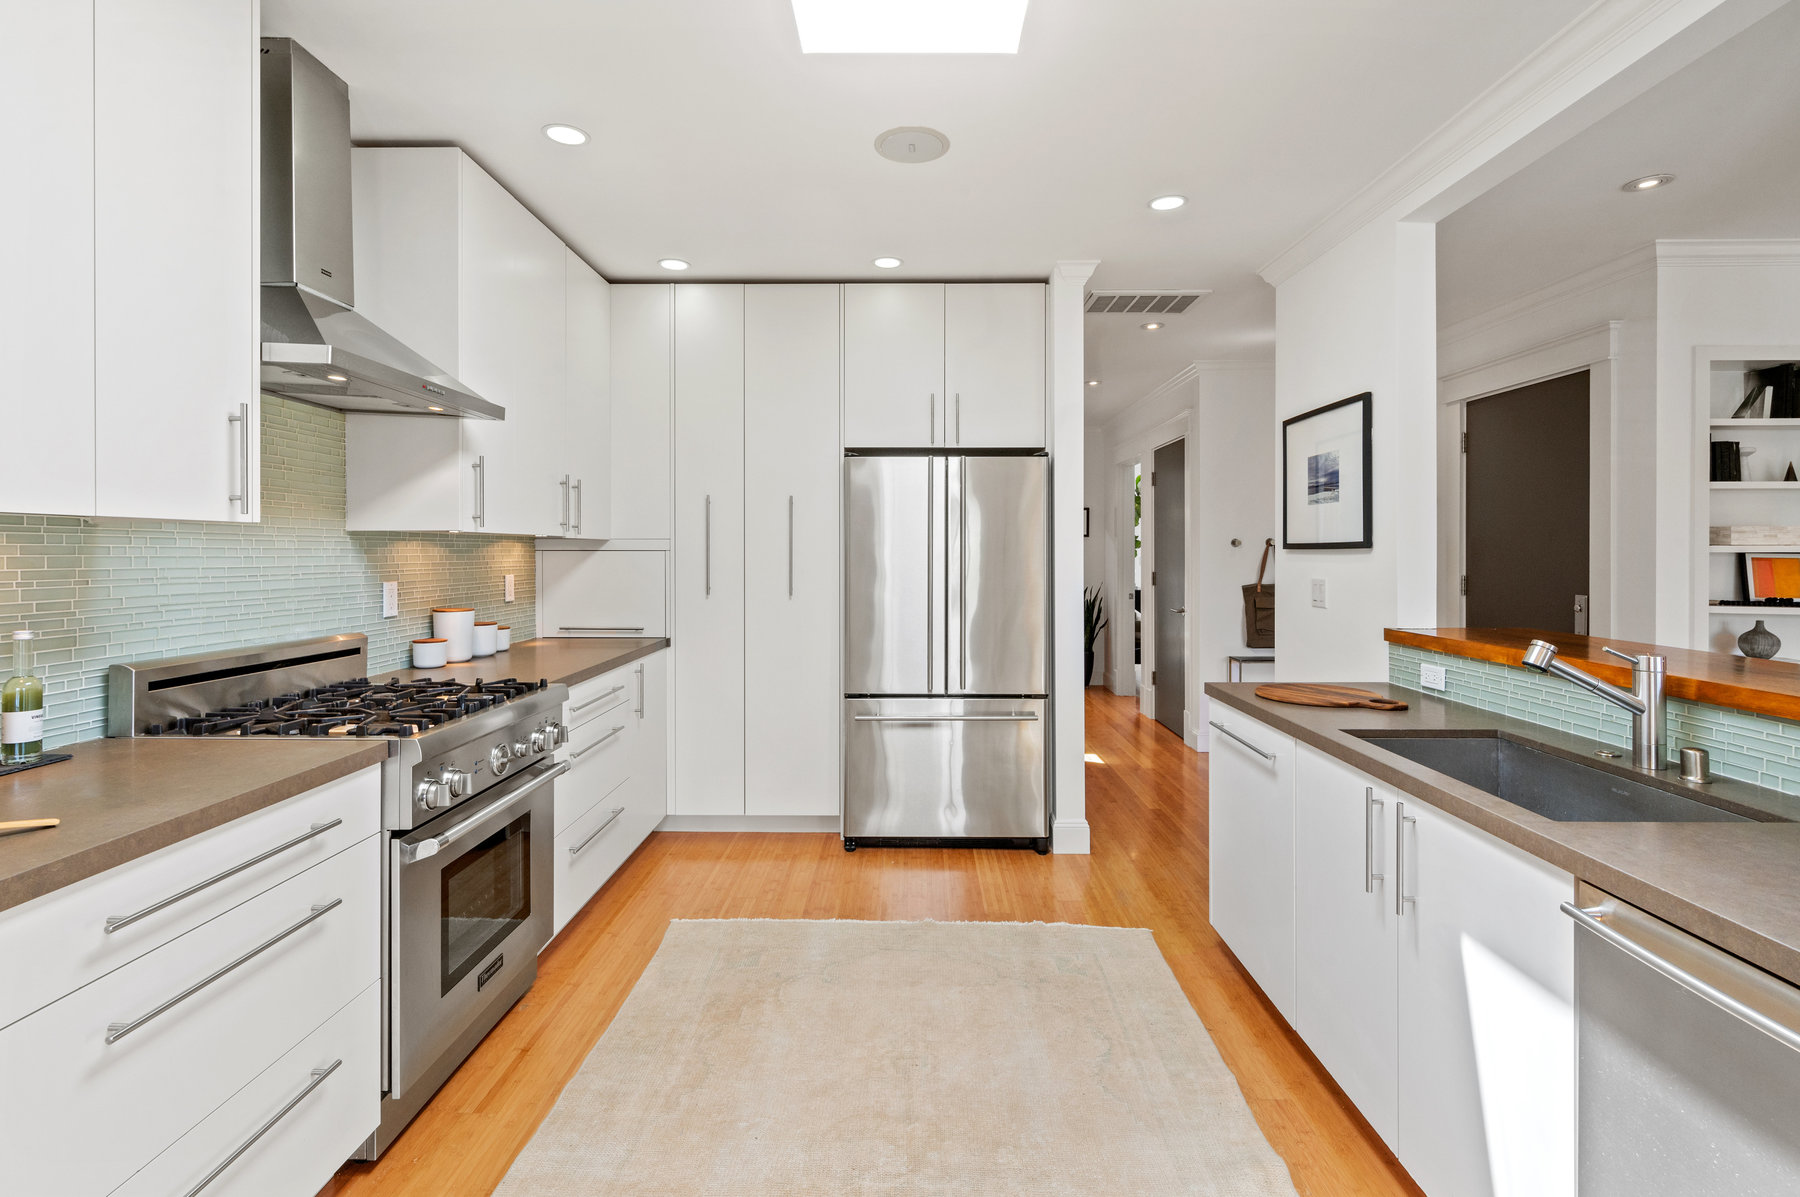 Property Photo: Kitchen from dining room. All stainless steel appliances with all white cabinetry. 